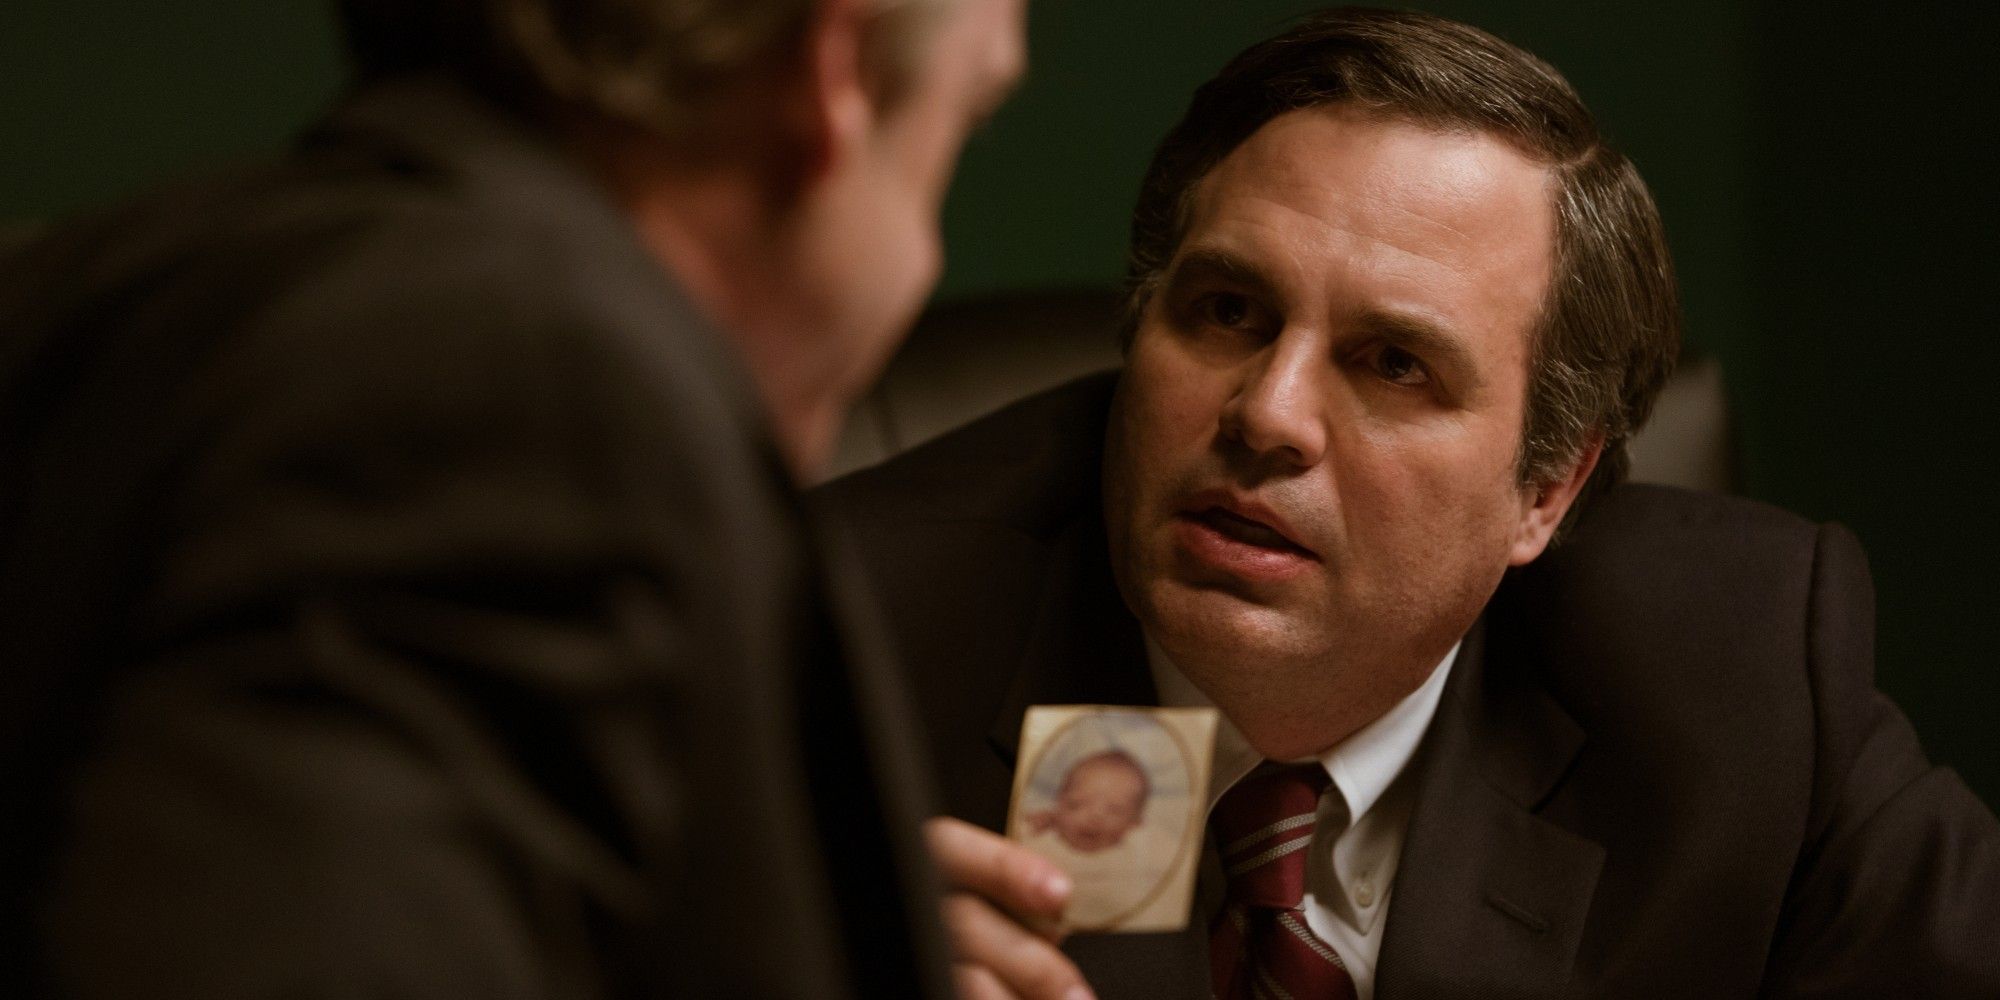 Mark Ruffalo's lawyer character conducts an investigation in Dark Waters